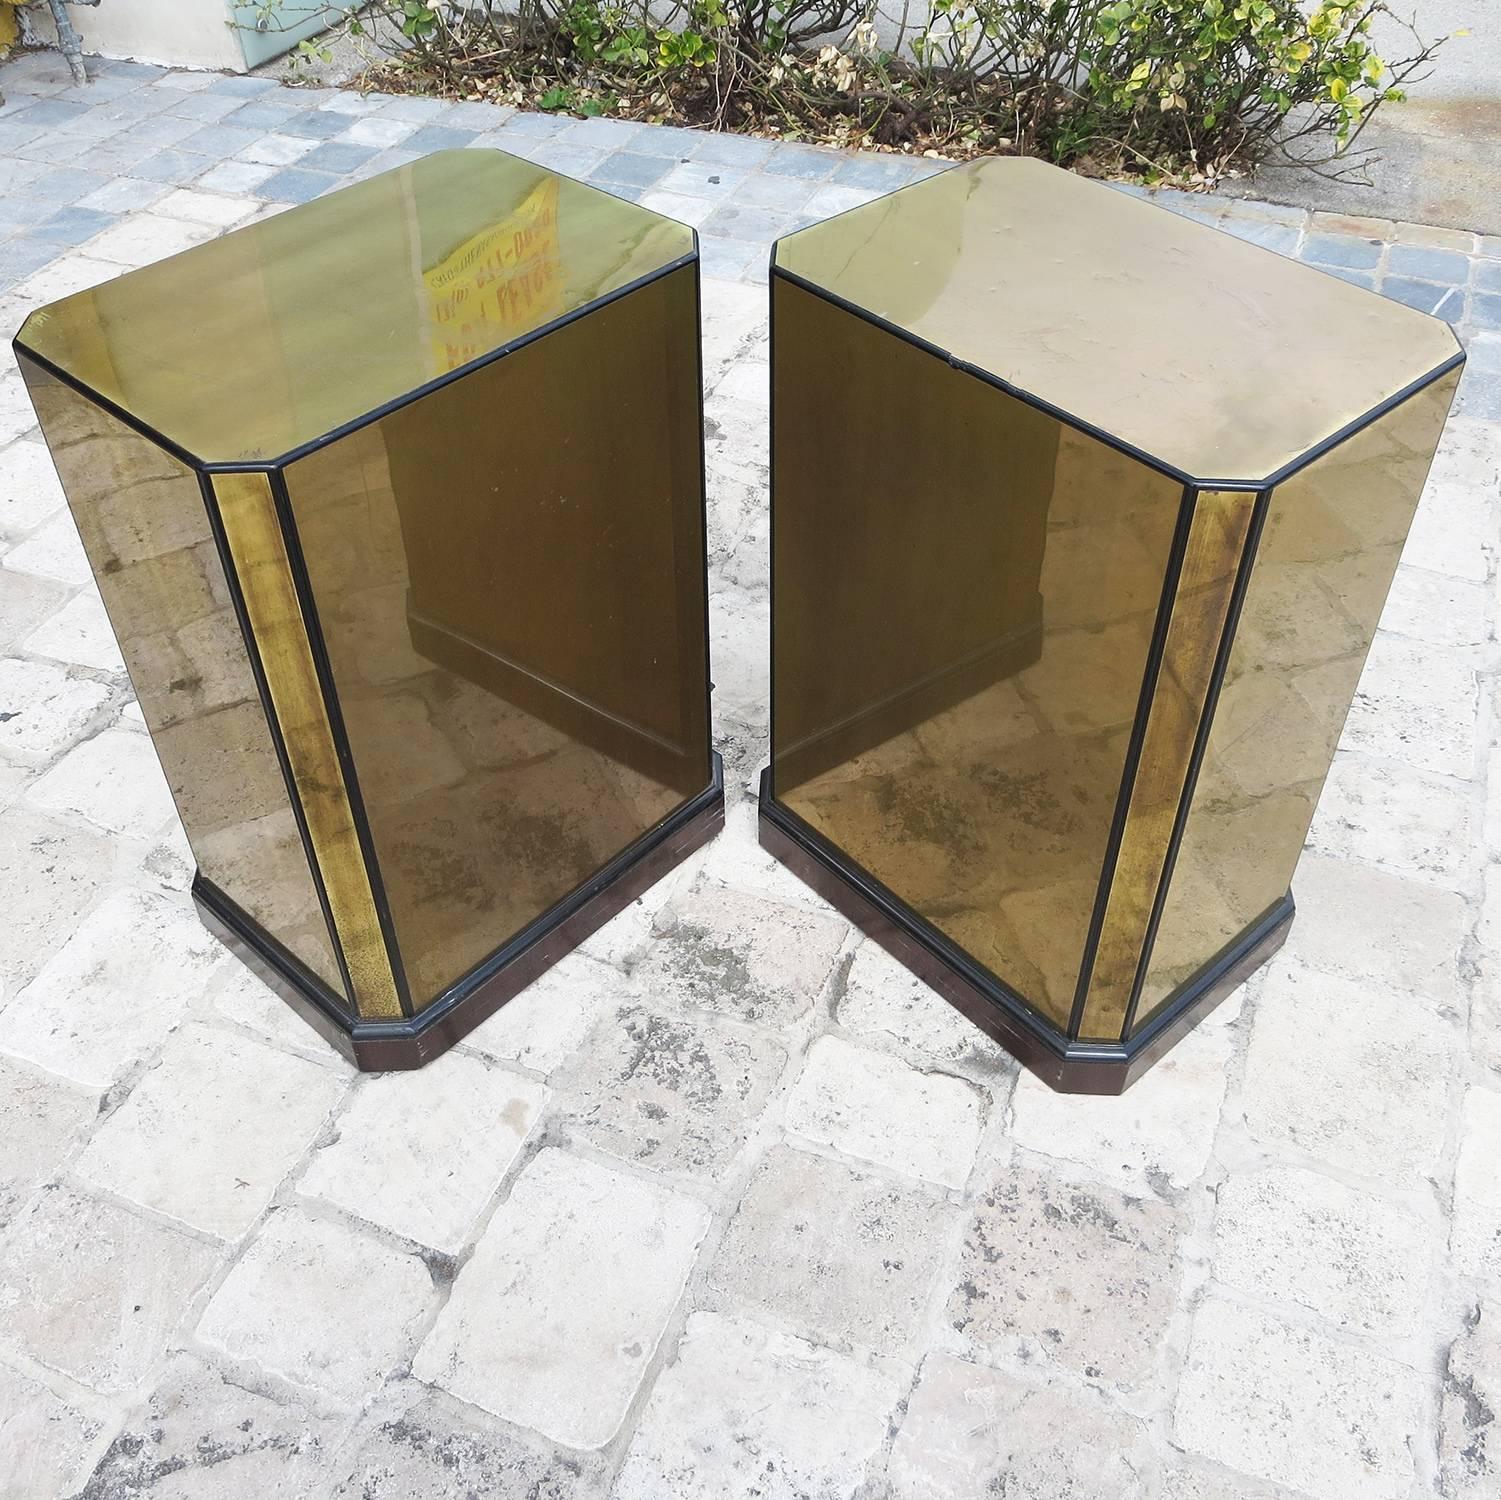 RETIREMENT SALE!!!  EVERYTHING MUST GO - CHECK OUT OUR OTHER ITEMS.				

Original 1970s brass veneered pedestals trimmed in lacquered wood with dark wood bases. The height makes them perfect for a dining table, to be topped with your custom glass